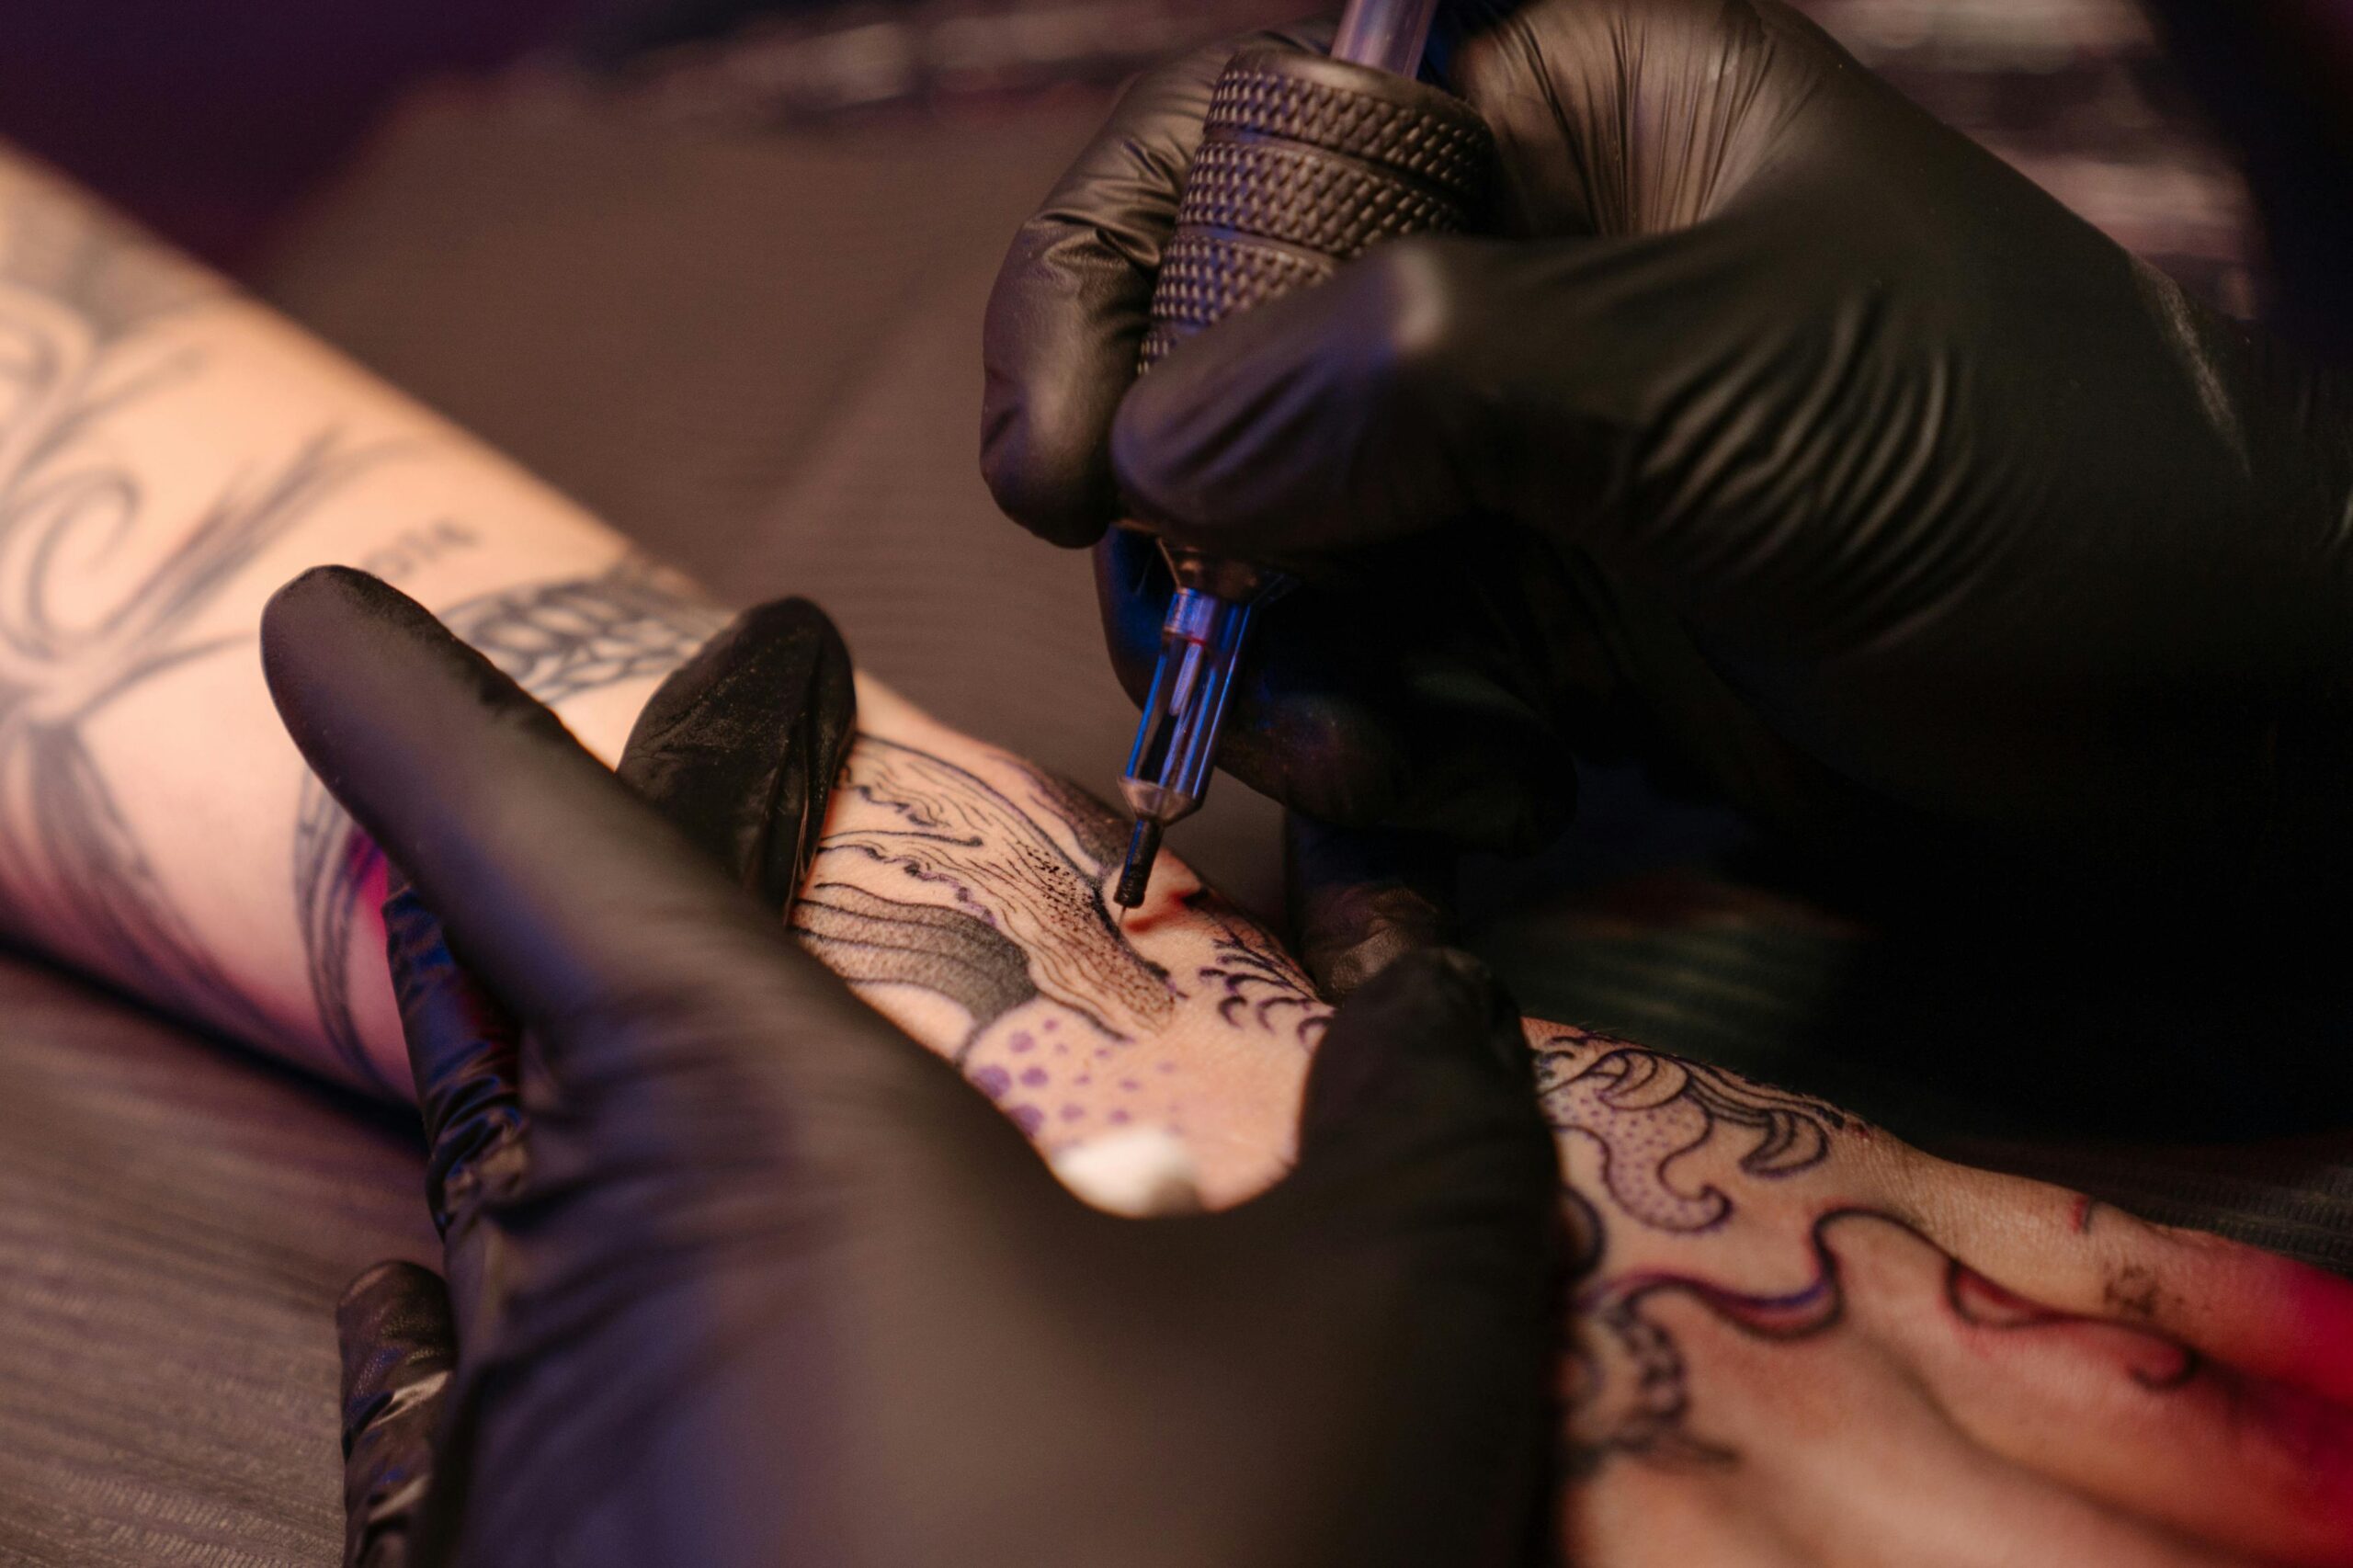 man getting a color tattoo on his wrist area